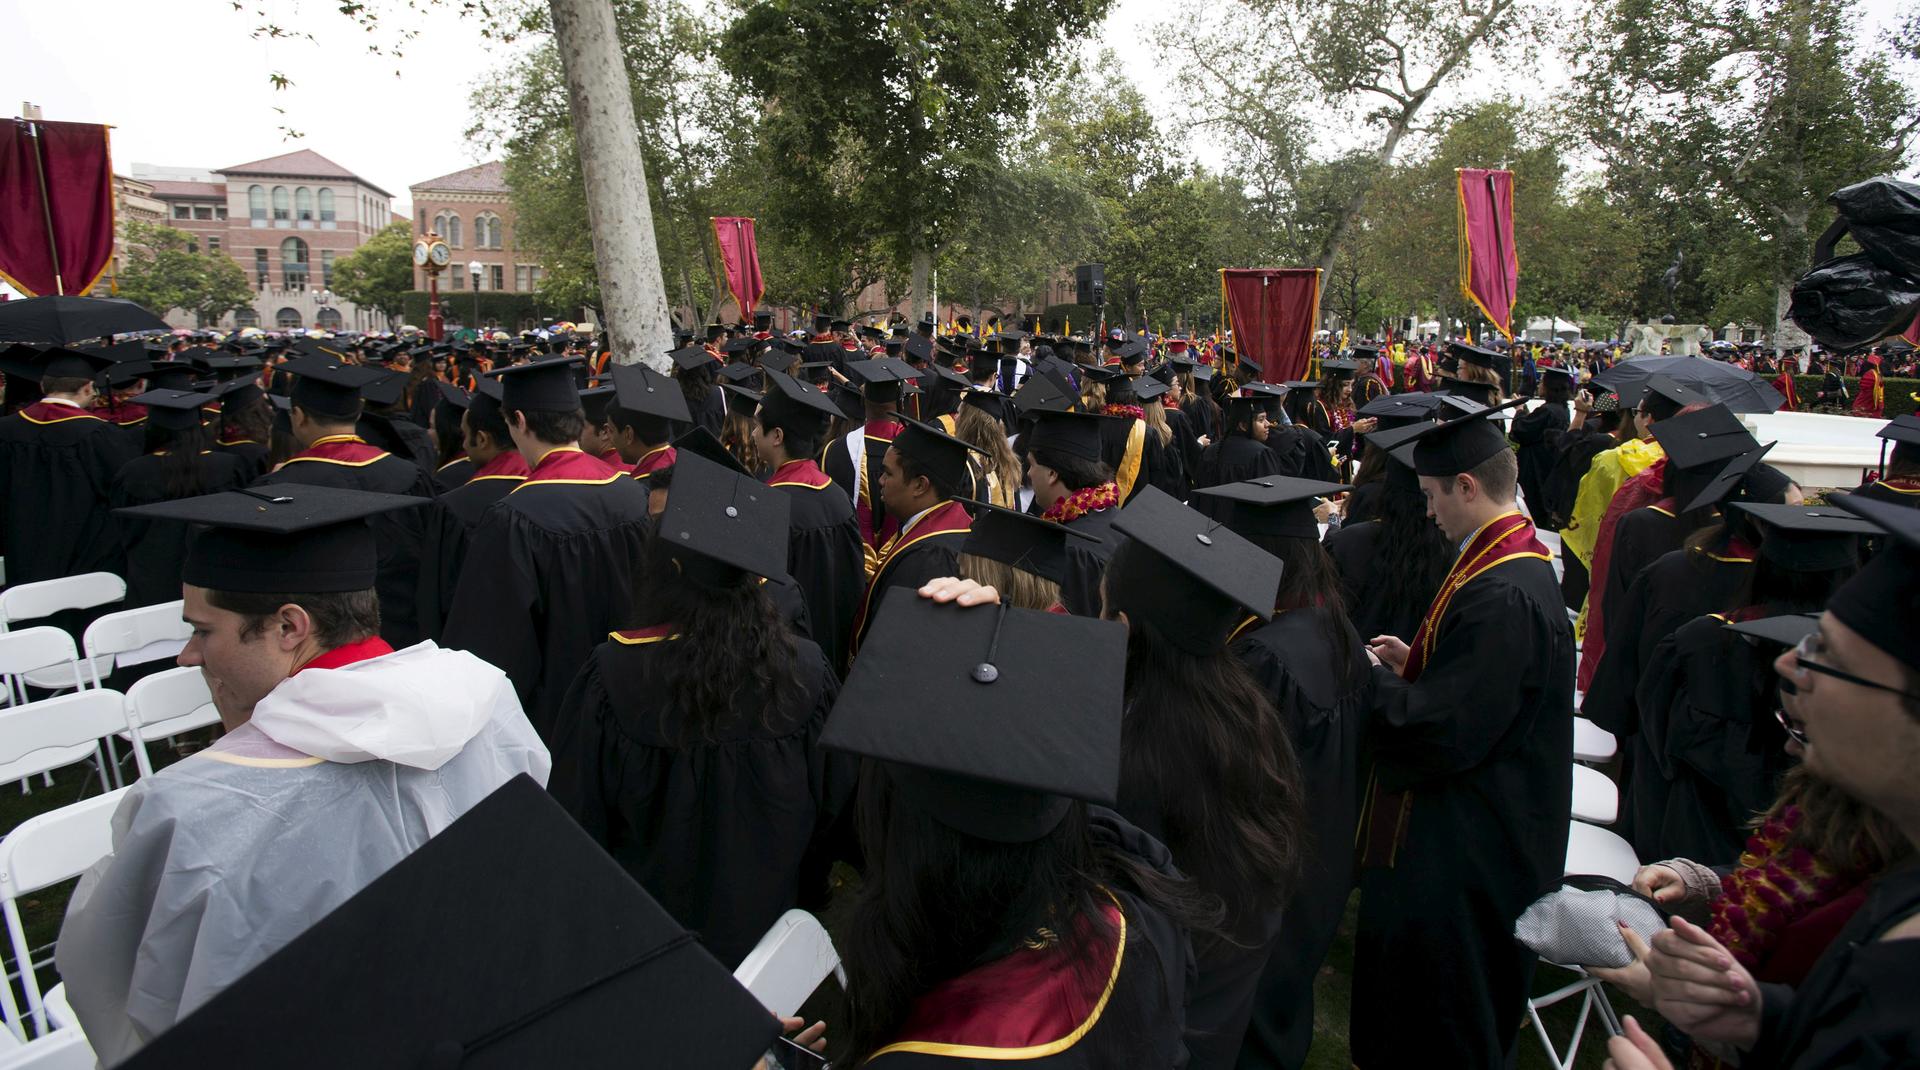 Graduating students attend USC's Commencement Ceremony at the University of Southern California in Los Angeles, California, May 15, 2015.